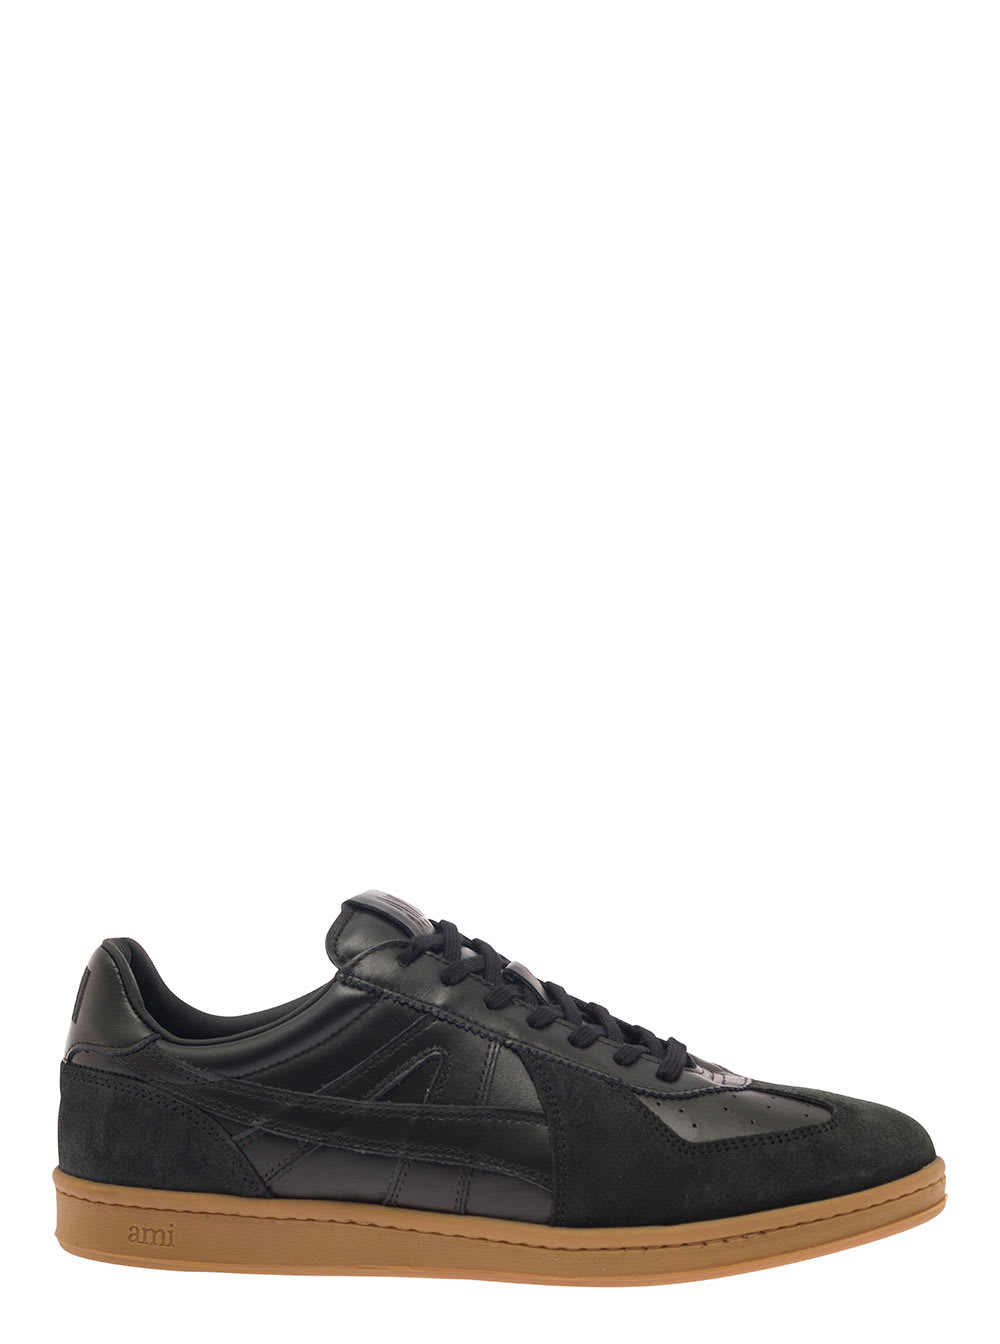 AMI ALEXANDRE MATTIUSSI BLACK LOW-TOP SNEAKERS WITH SUEDE INSERTS AND CONTRASTING SOLE IN LEATHER MAN